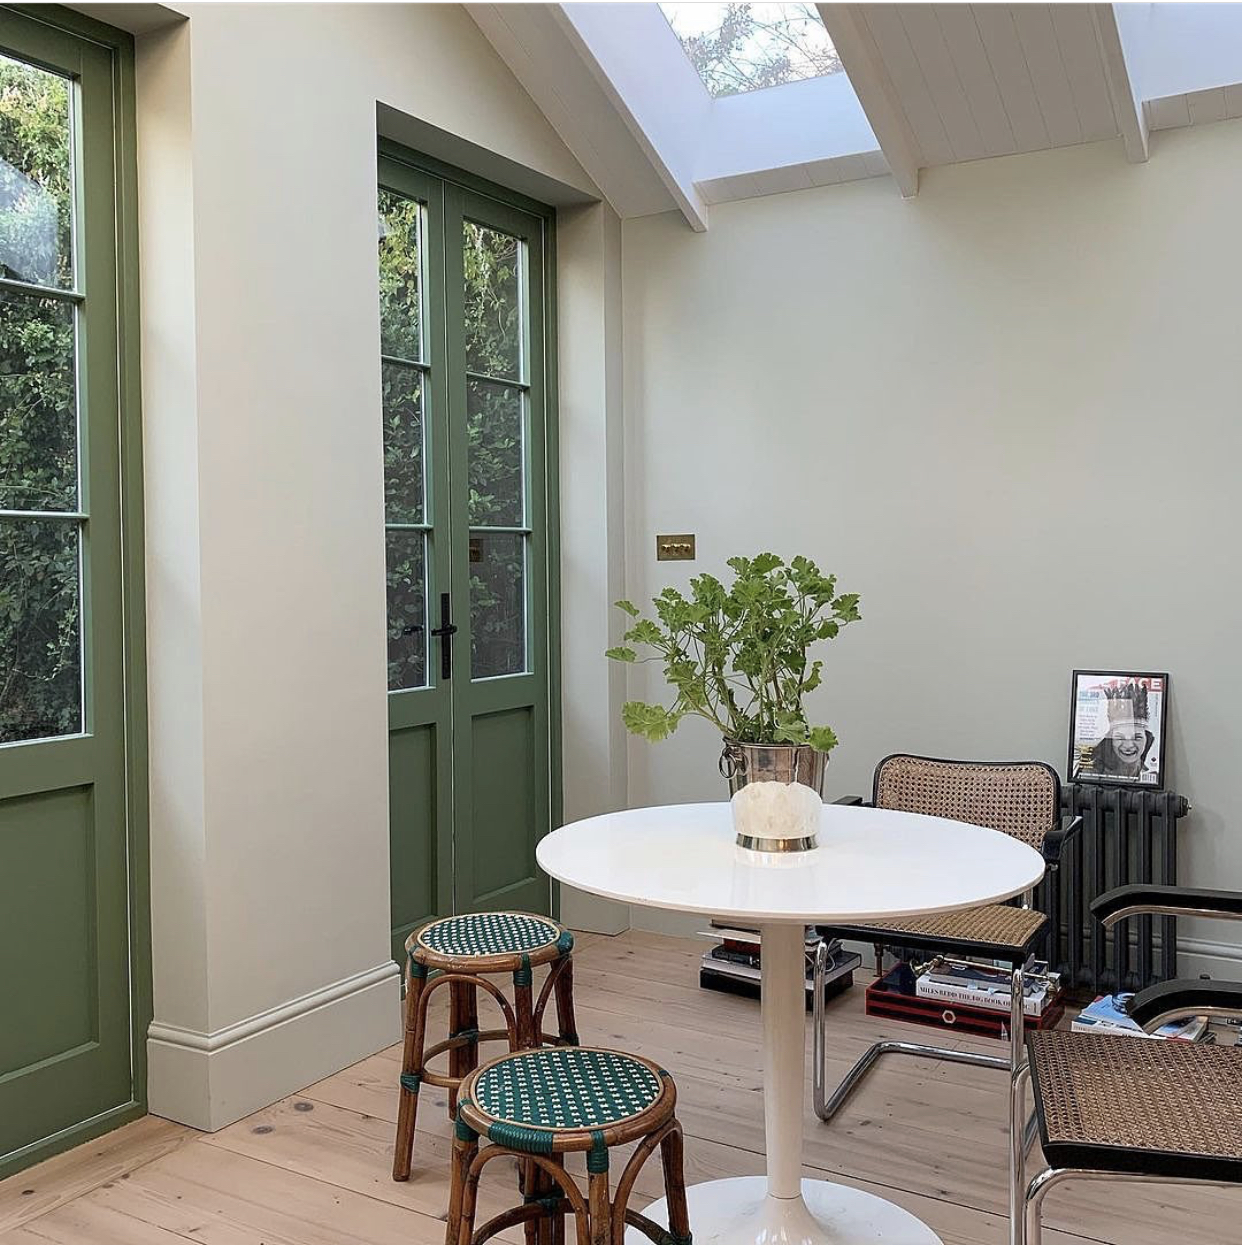 mizzle walls and calke green on woodwork farrow and ball image by matilda goad